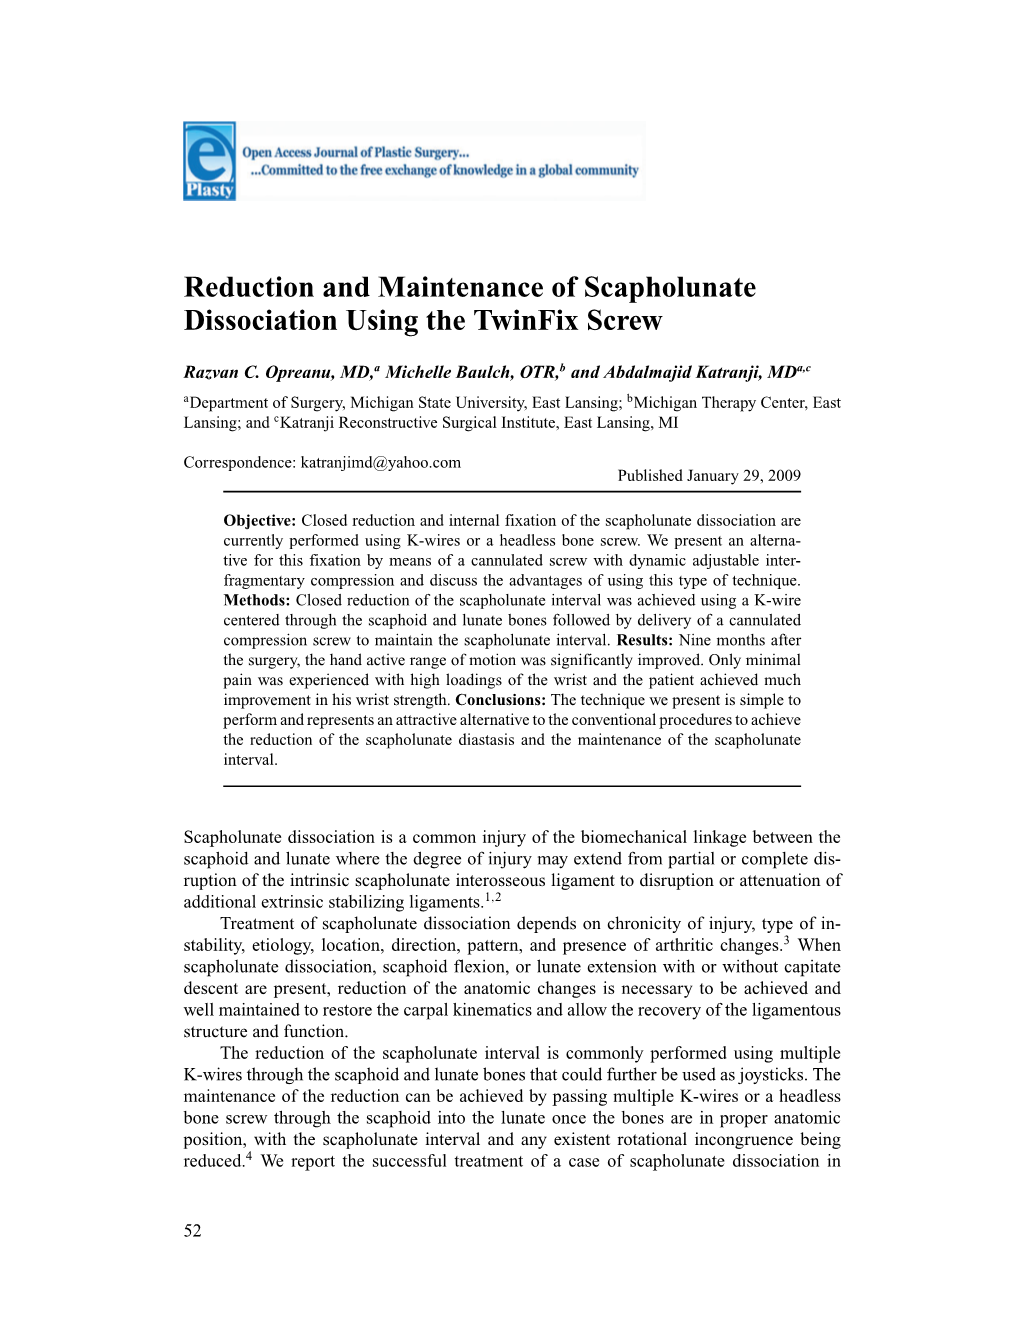 Reduction and Maintenance of Scapholunate Dissociation Using the Twinfix Screw